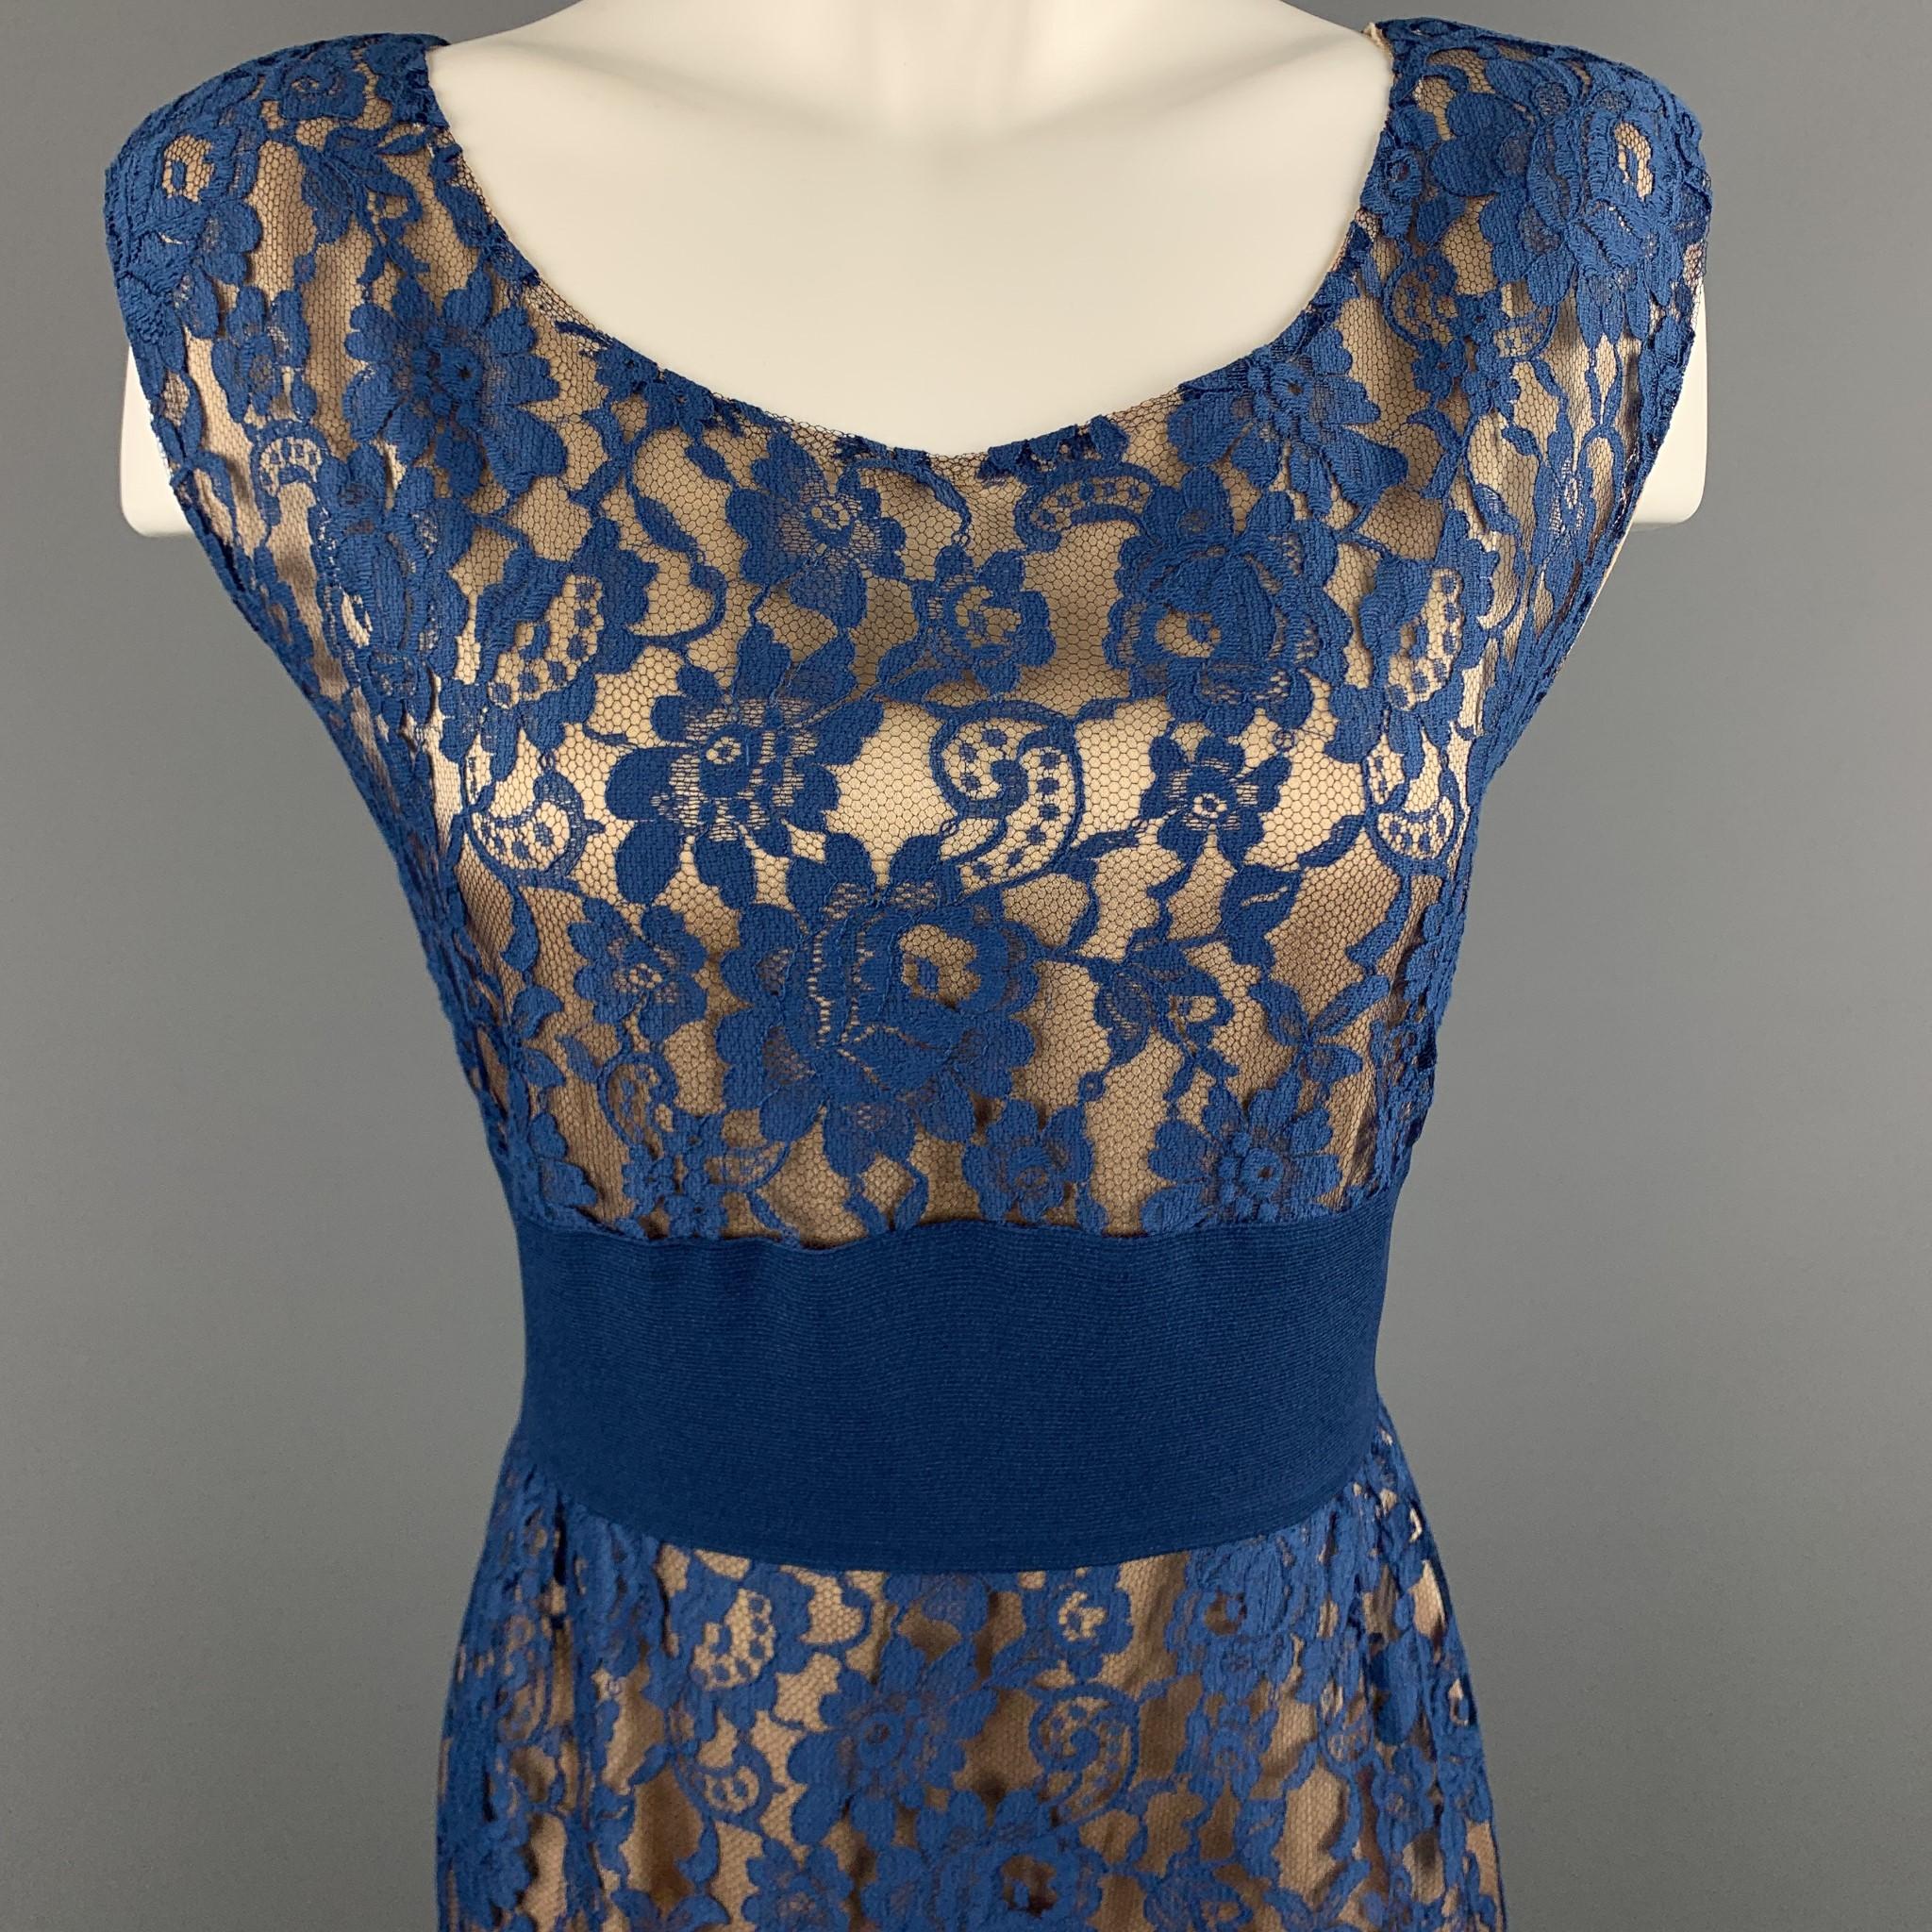 Vintage ROSANNA MANZONI per L'ETICHETTA sleeveless shift dress comes in blue silk lace with a round boat neckline, thick waistband, and beige satin liner. Made in France.

Excellent Pre-Owned Condition.
Marked: FR 42

Measurements:

Shoulder: 17